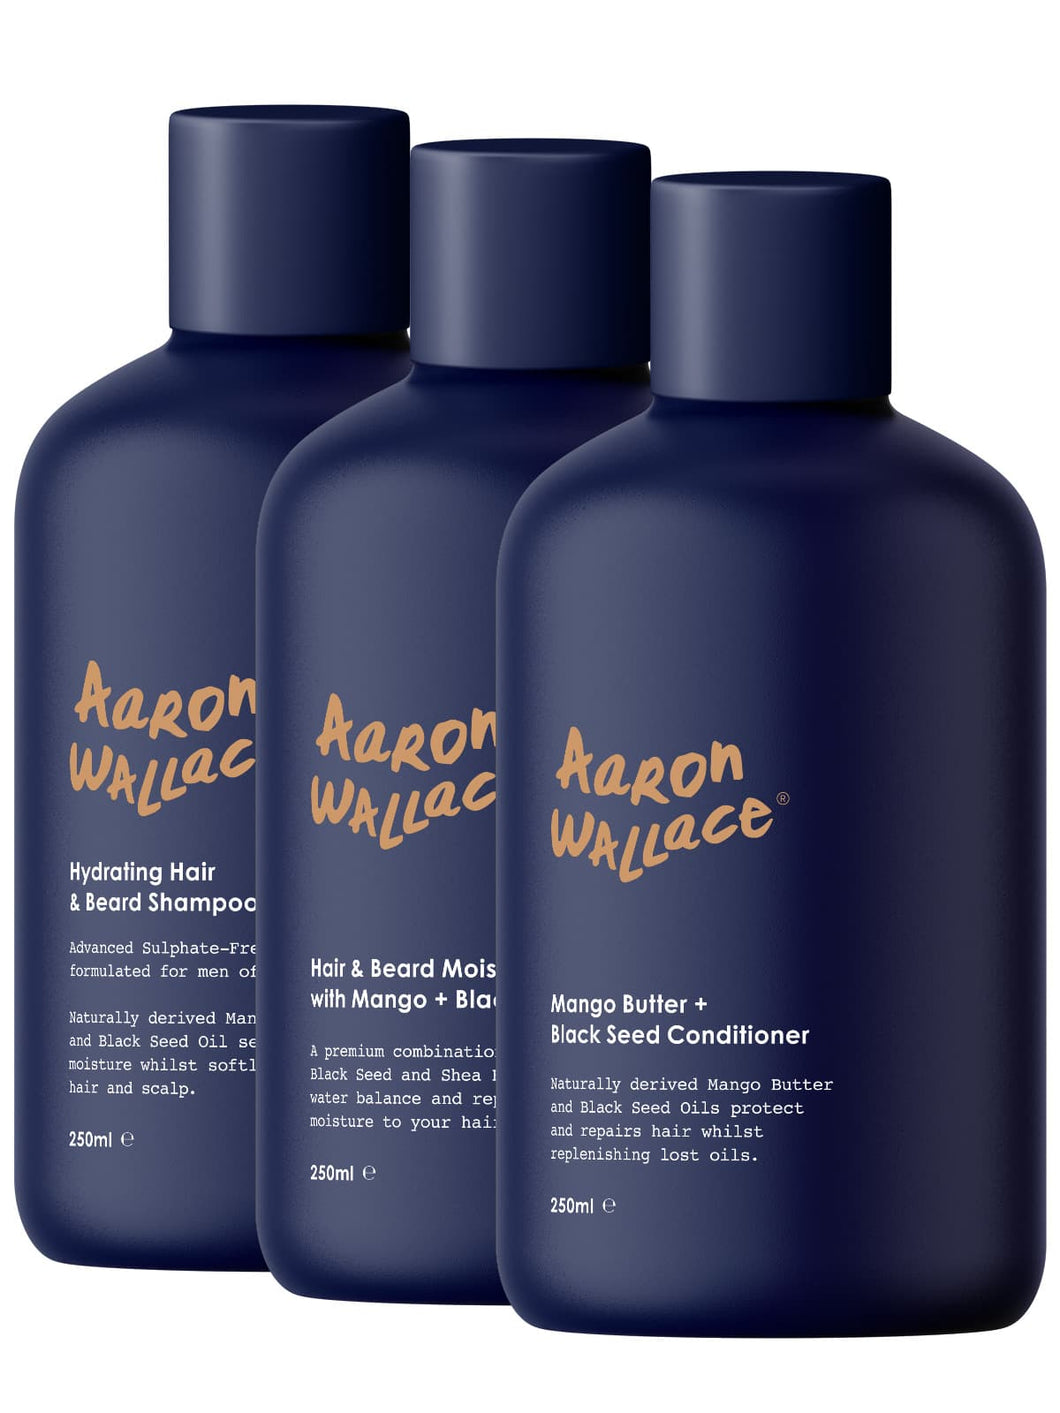 Aaron Wallace 3 step haircare system